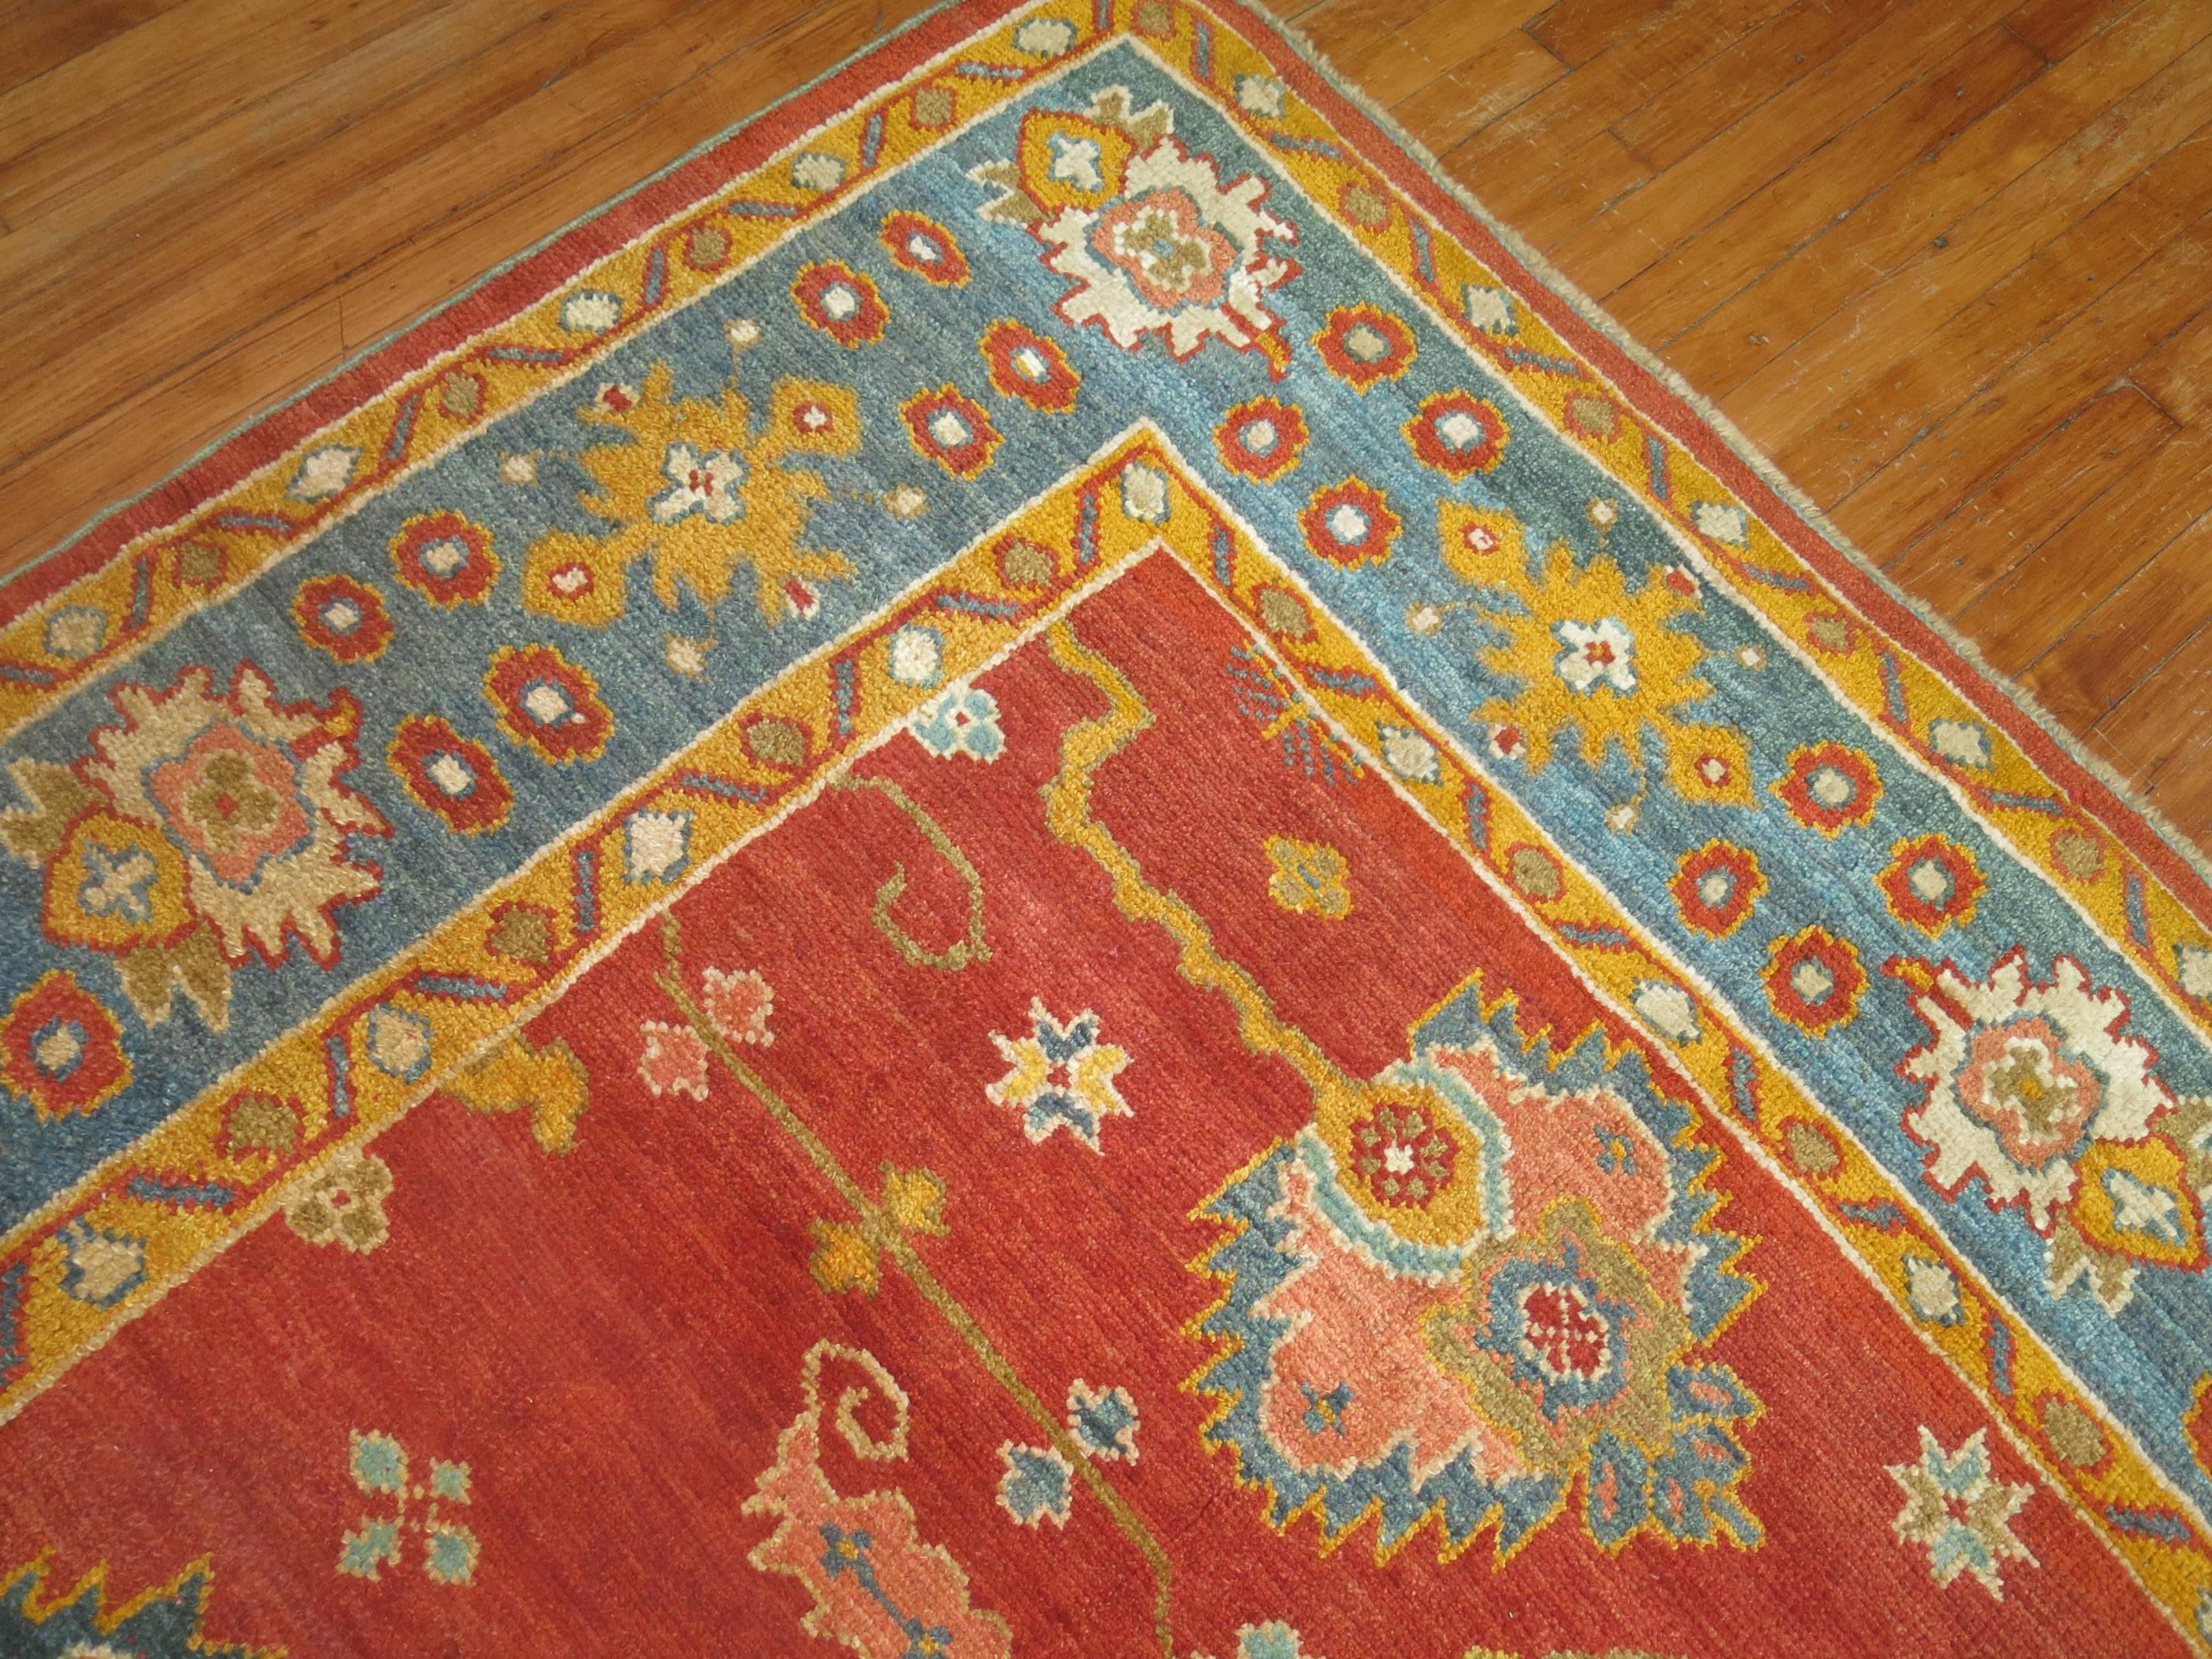 Colorful Oushak made from 100 % hand spun vegetable dyed recycled wool giving it an old world and vintage feel. This piece is part of a new collection of vintage inspired rugs we are creating in Turkey. Specially made in a square size in bright